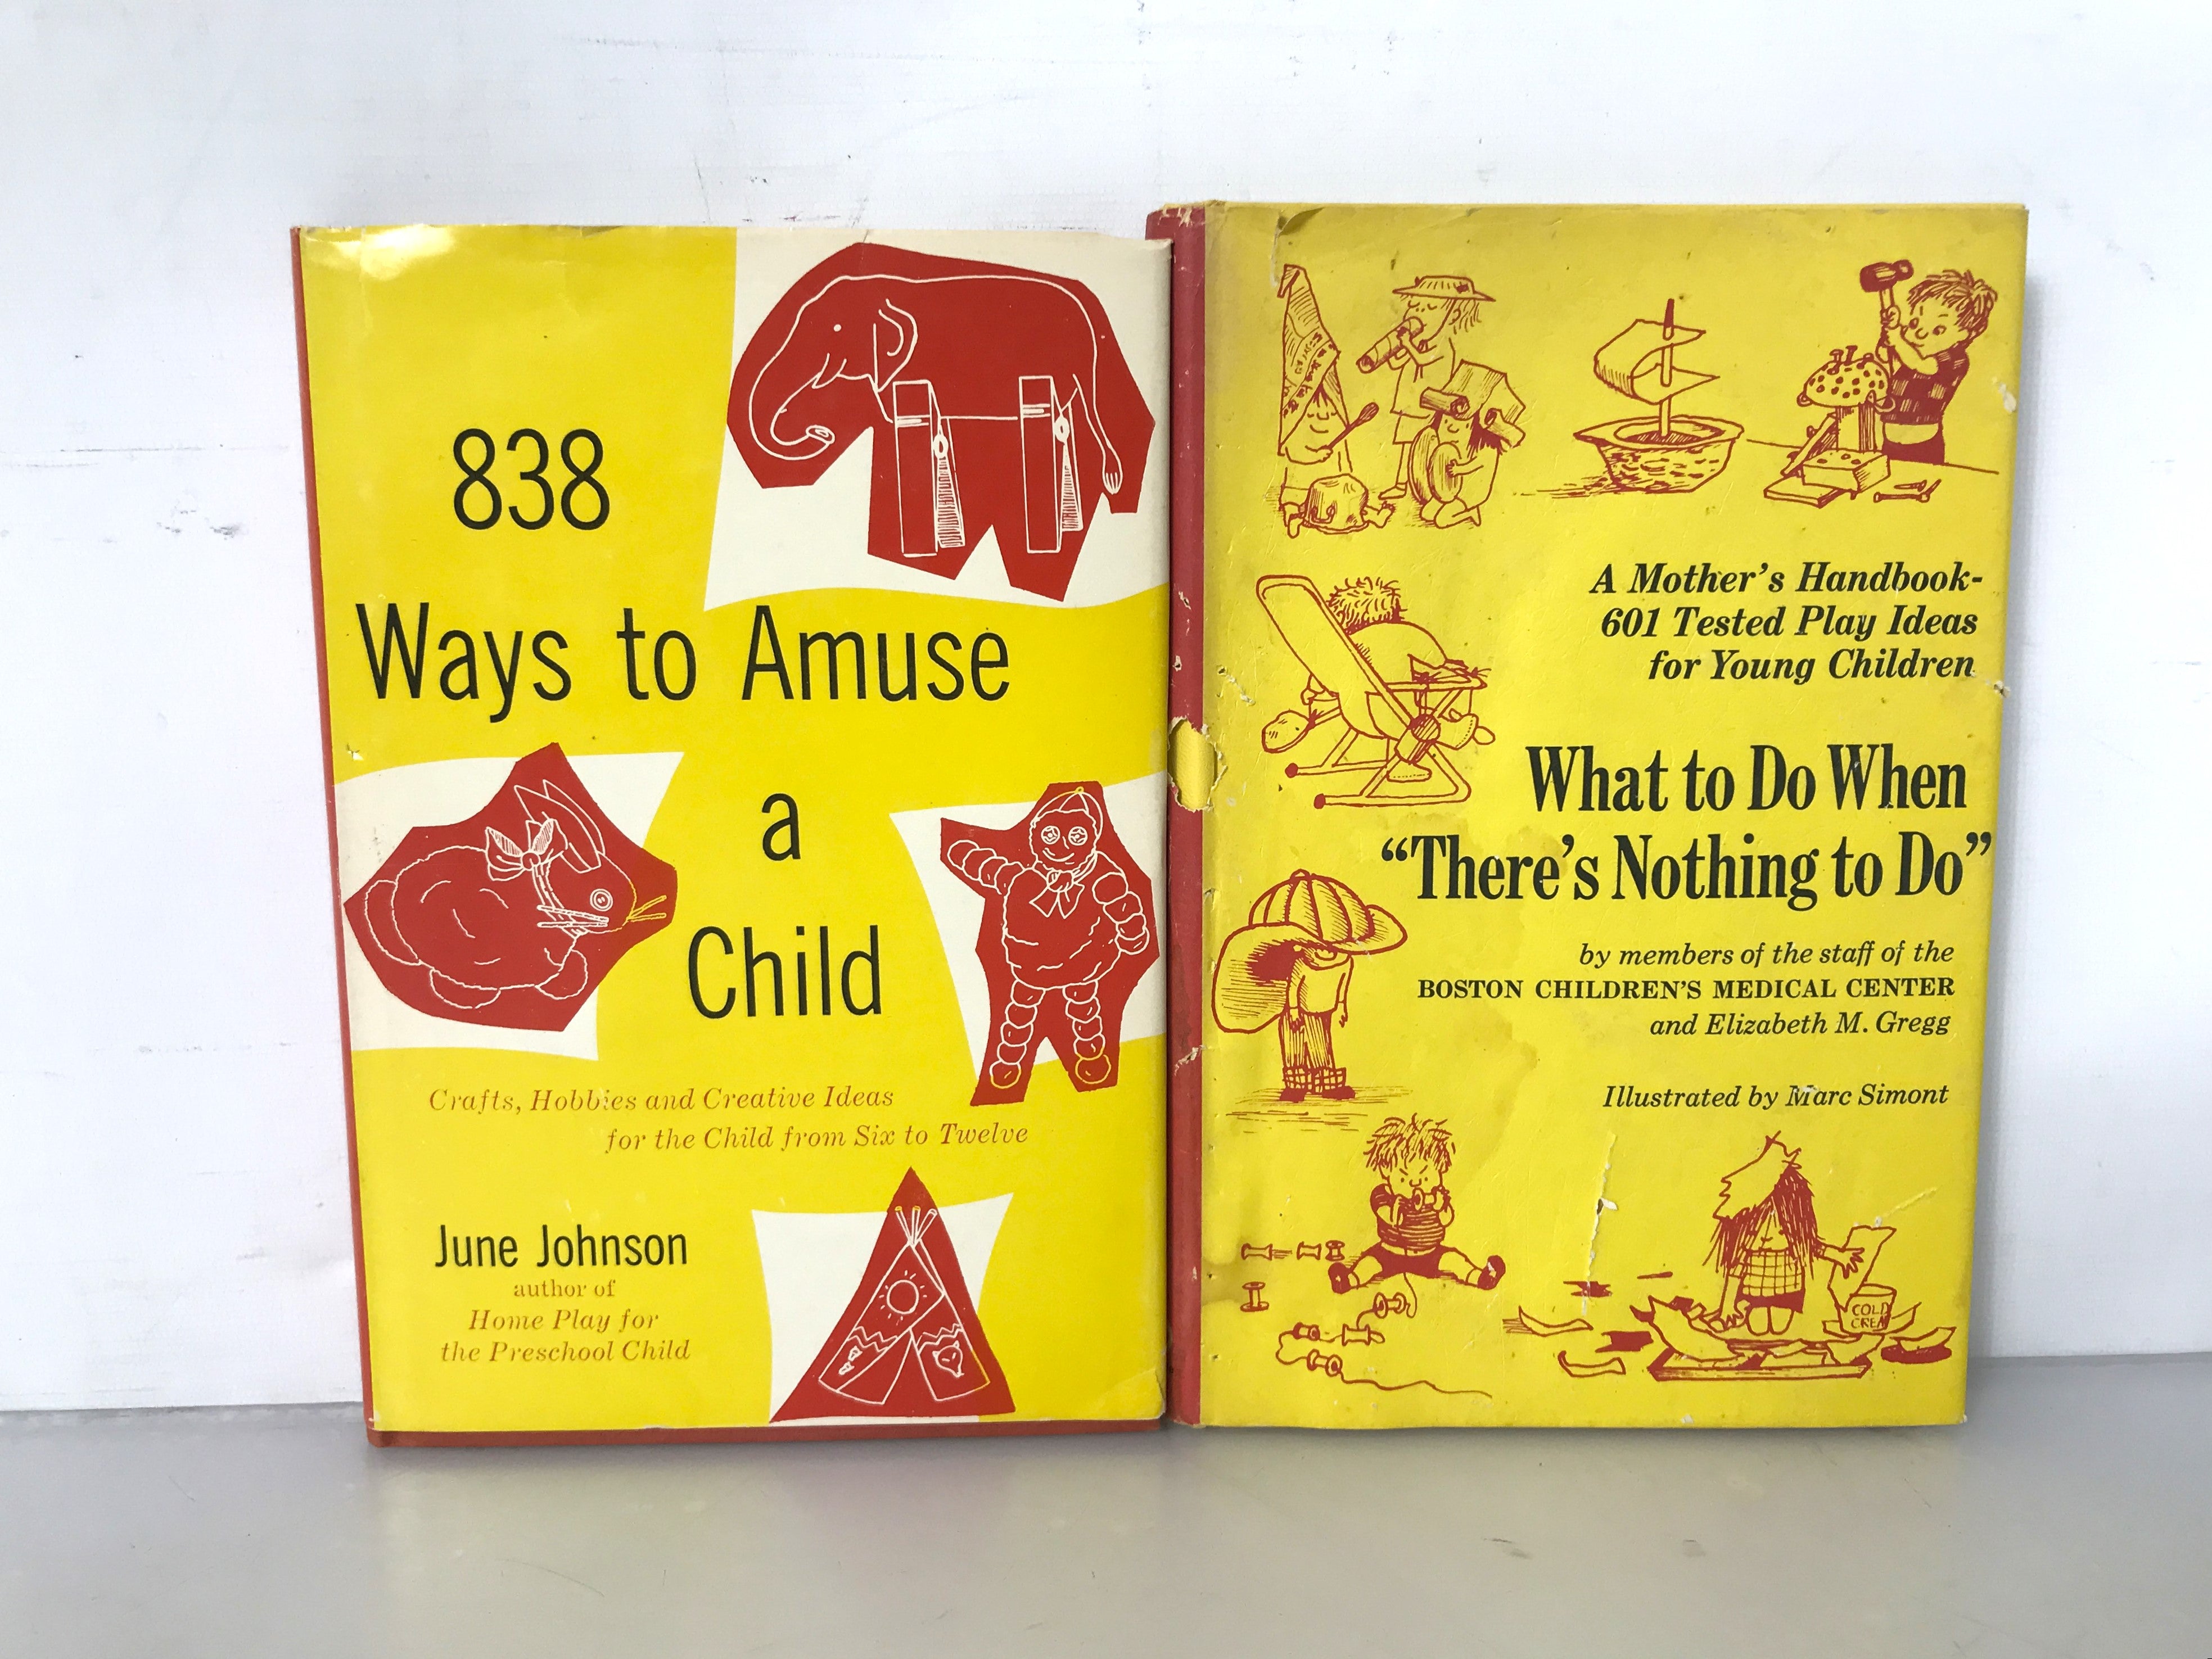 Lot of 2 Creative Play Ideas Books for Young Children by Gregg and Johnson 1960, 1968 HC DJ